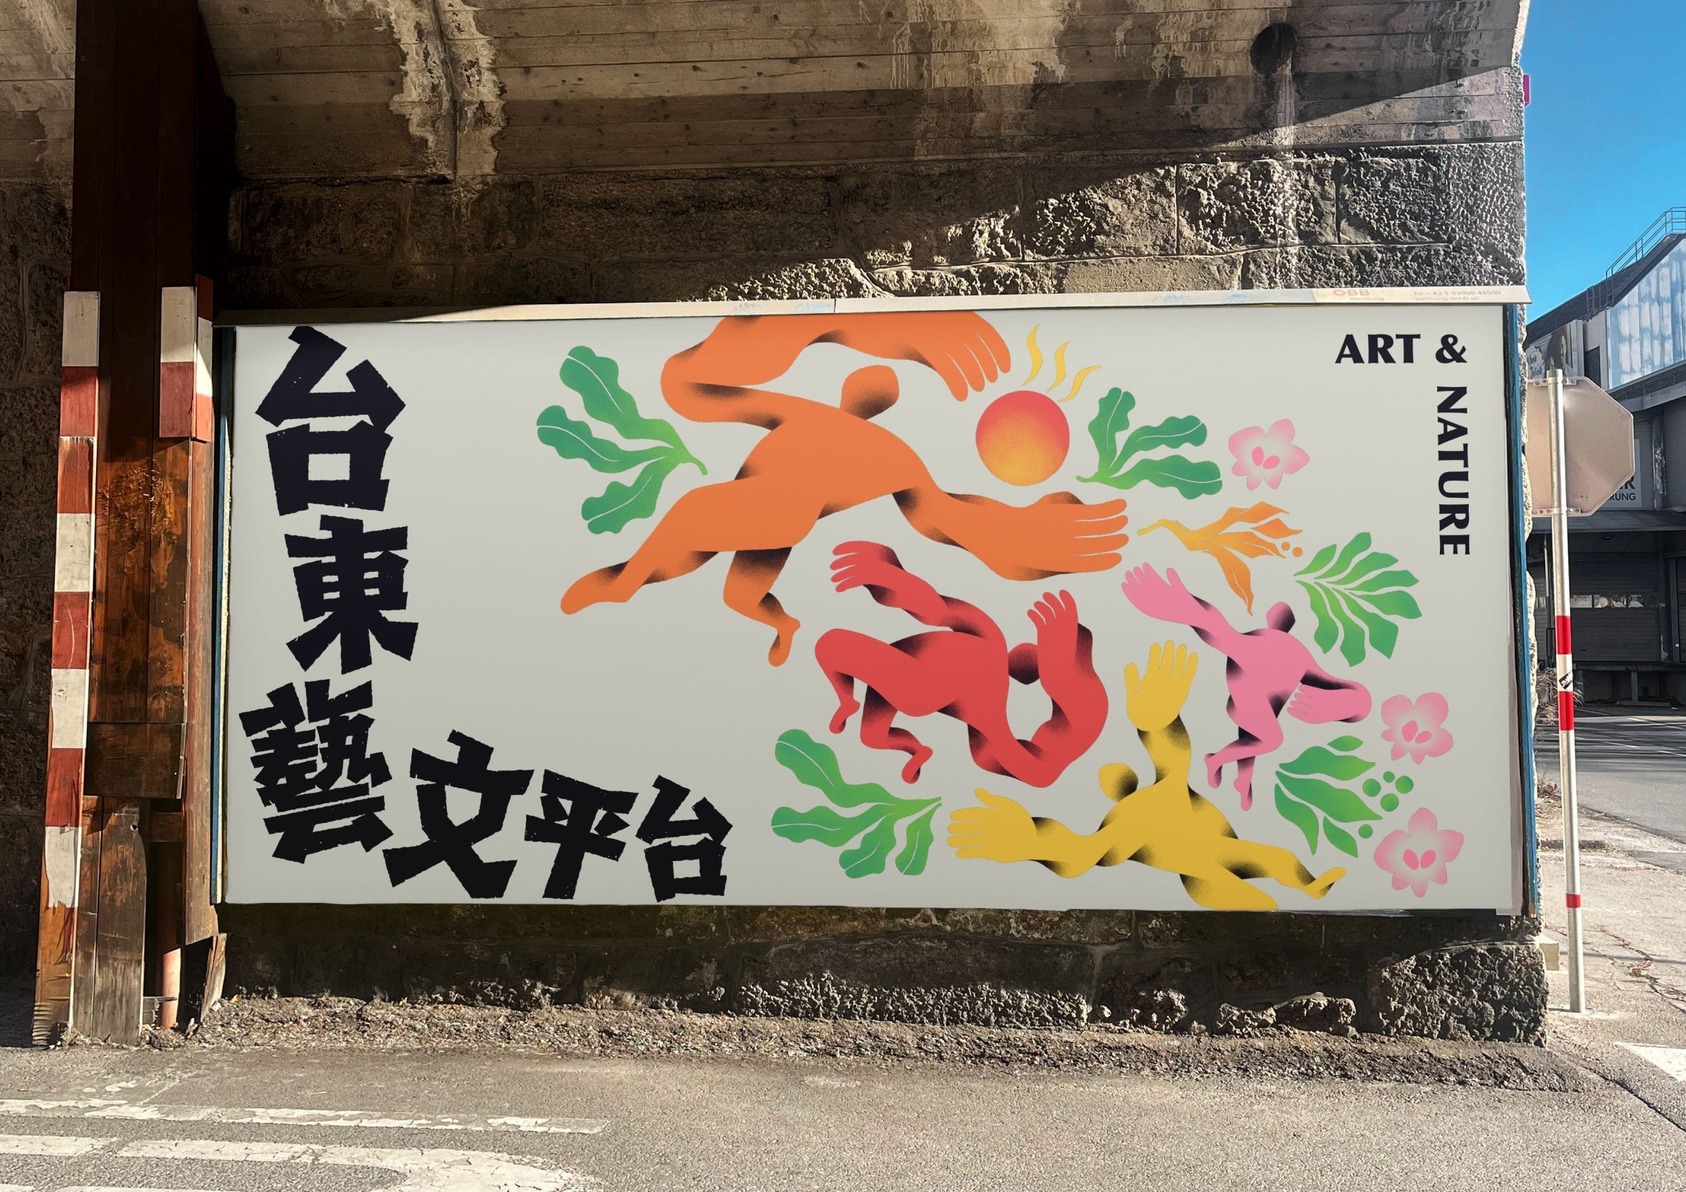 The Taitung Arts and Culture Center Image Identity-1